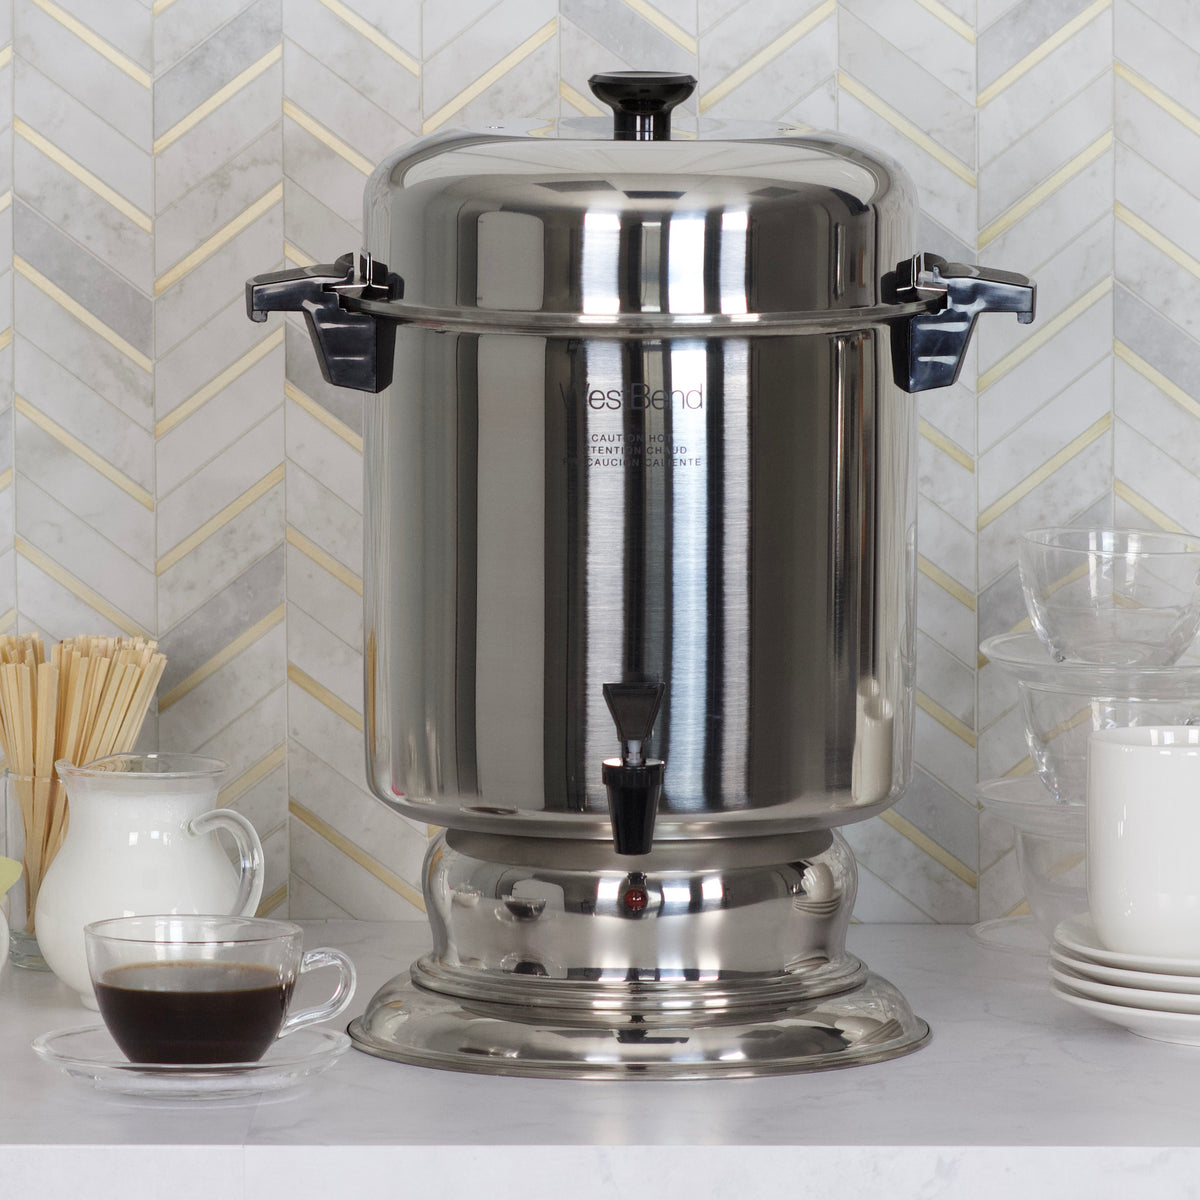 WestBend 55-Cup Large Capacity Commercial Coffee Urn Silver 13550 - Best Buy